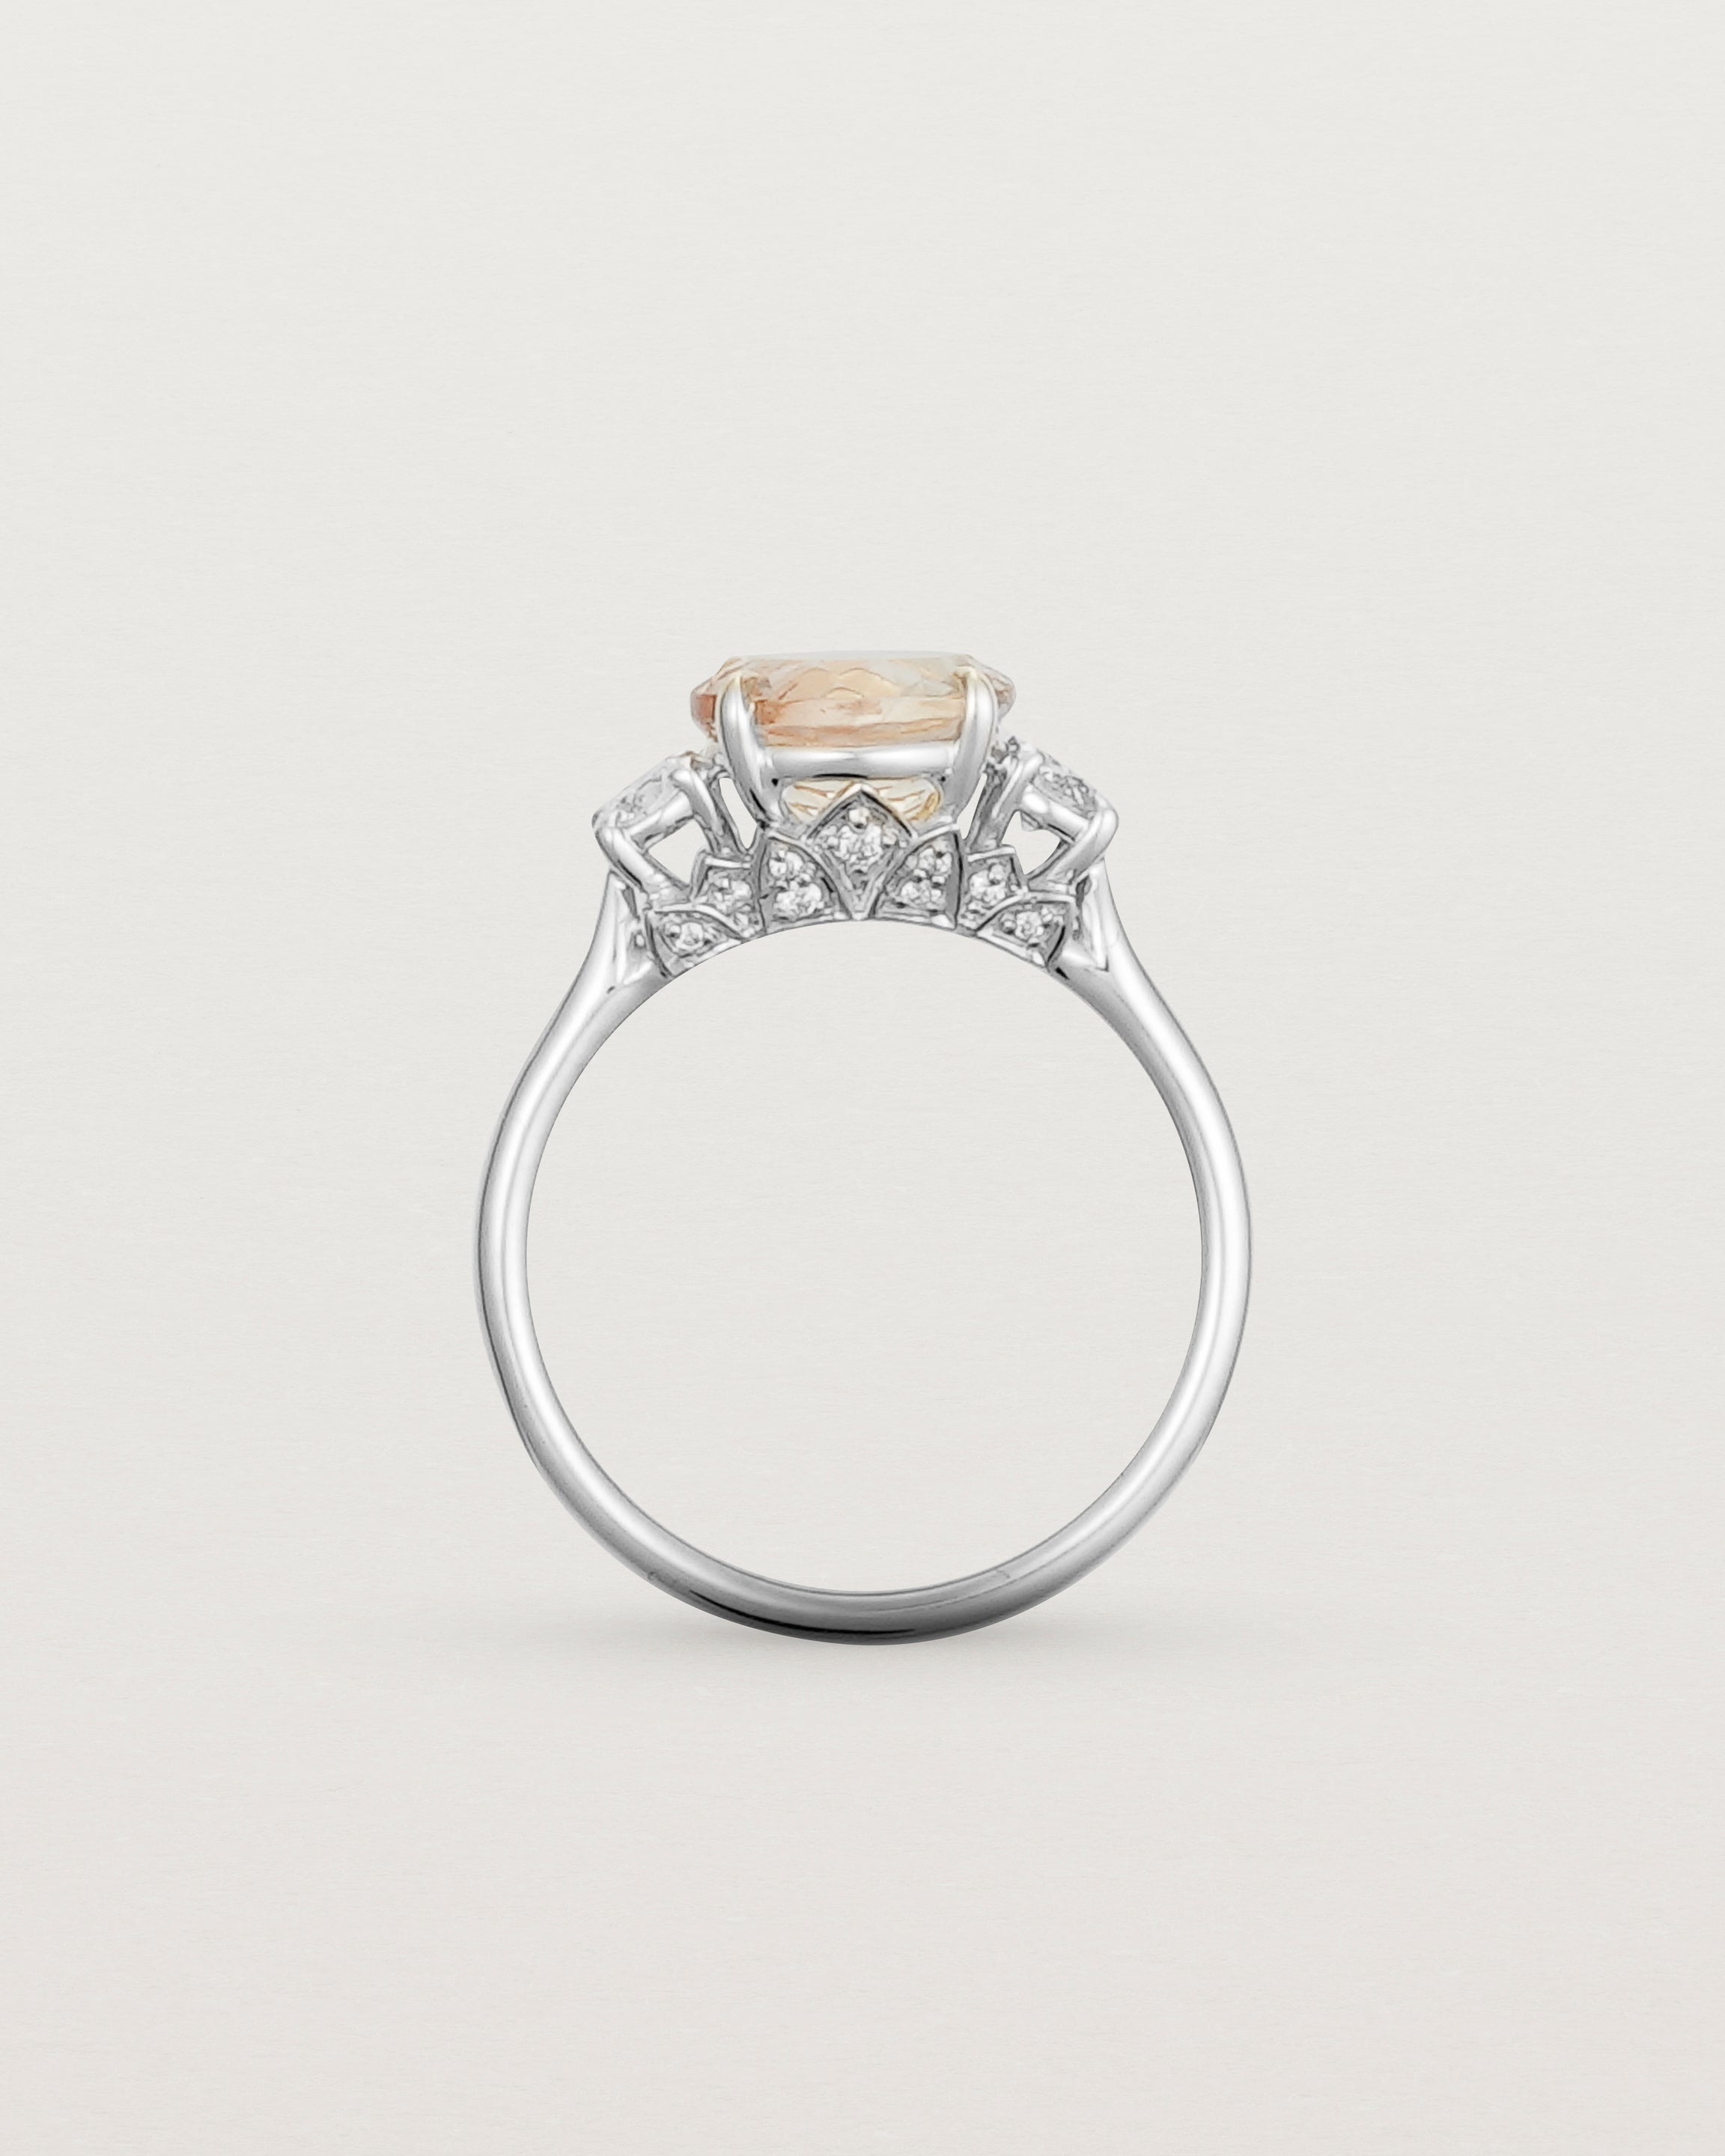 Standing view of the Laurel Round Trio Ring | Savannah Sunstone | White Gold.